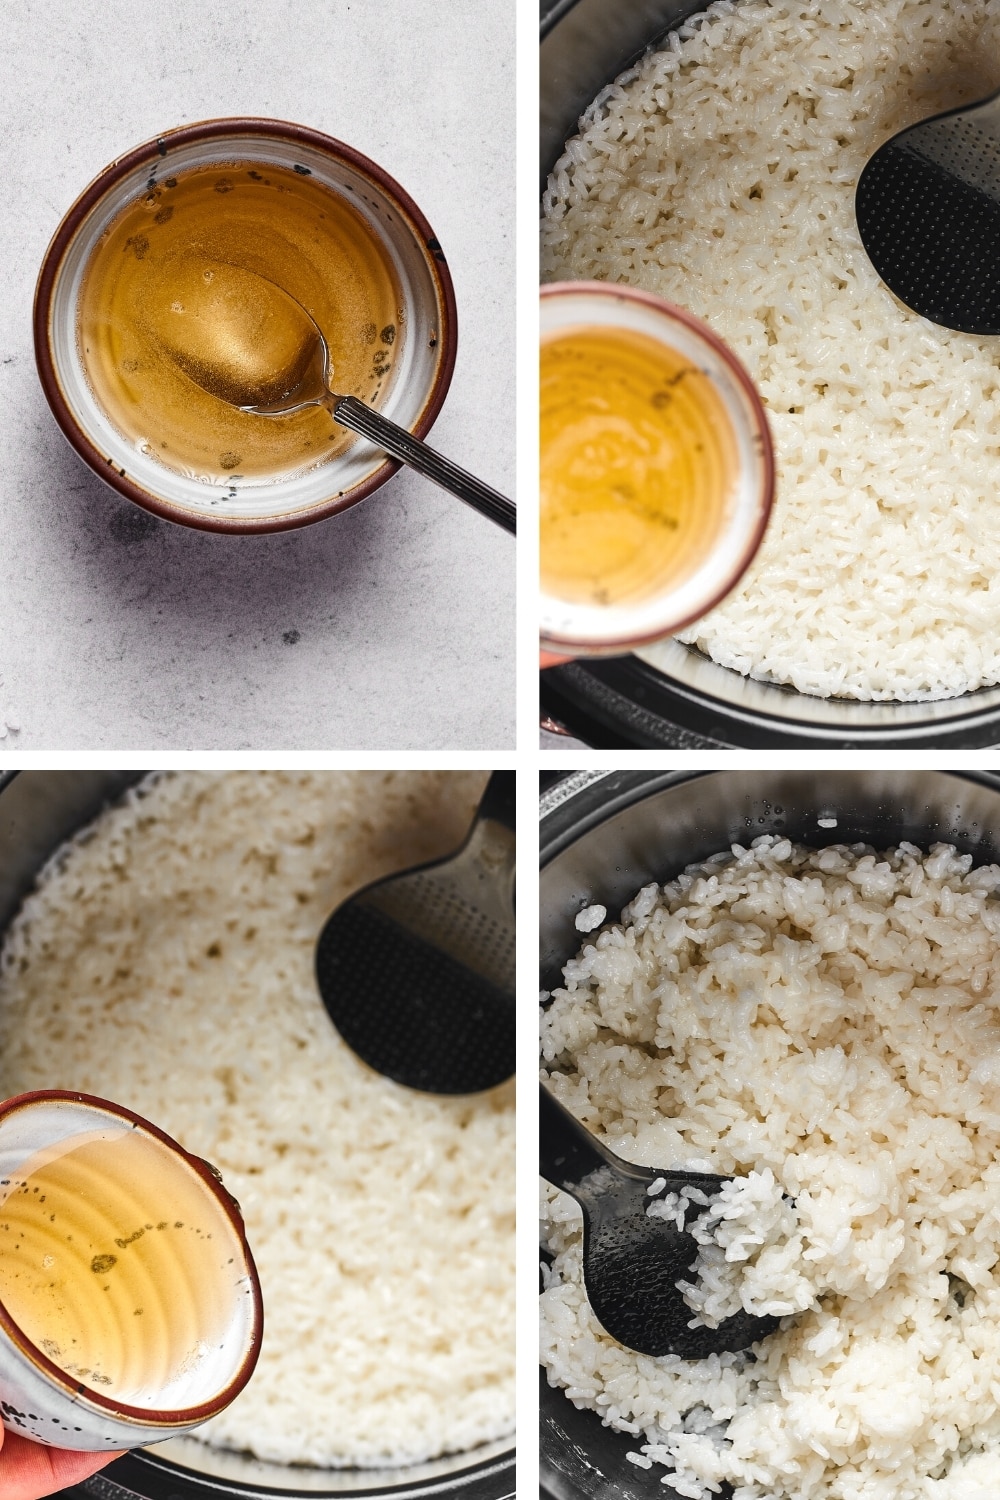 A four split picture showing a bowl of rice vinegar, rice vinegar and sushi rice in an instant pot, the rice vinegar being poured into the instant pot, and the rice being stirred around the instant pot.